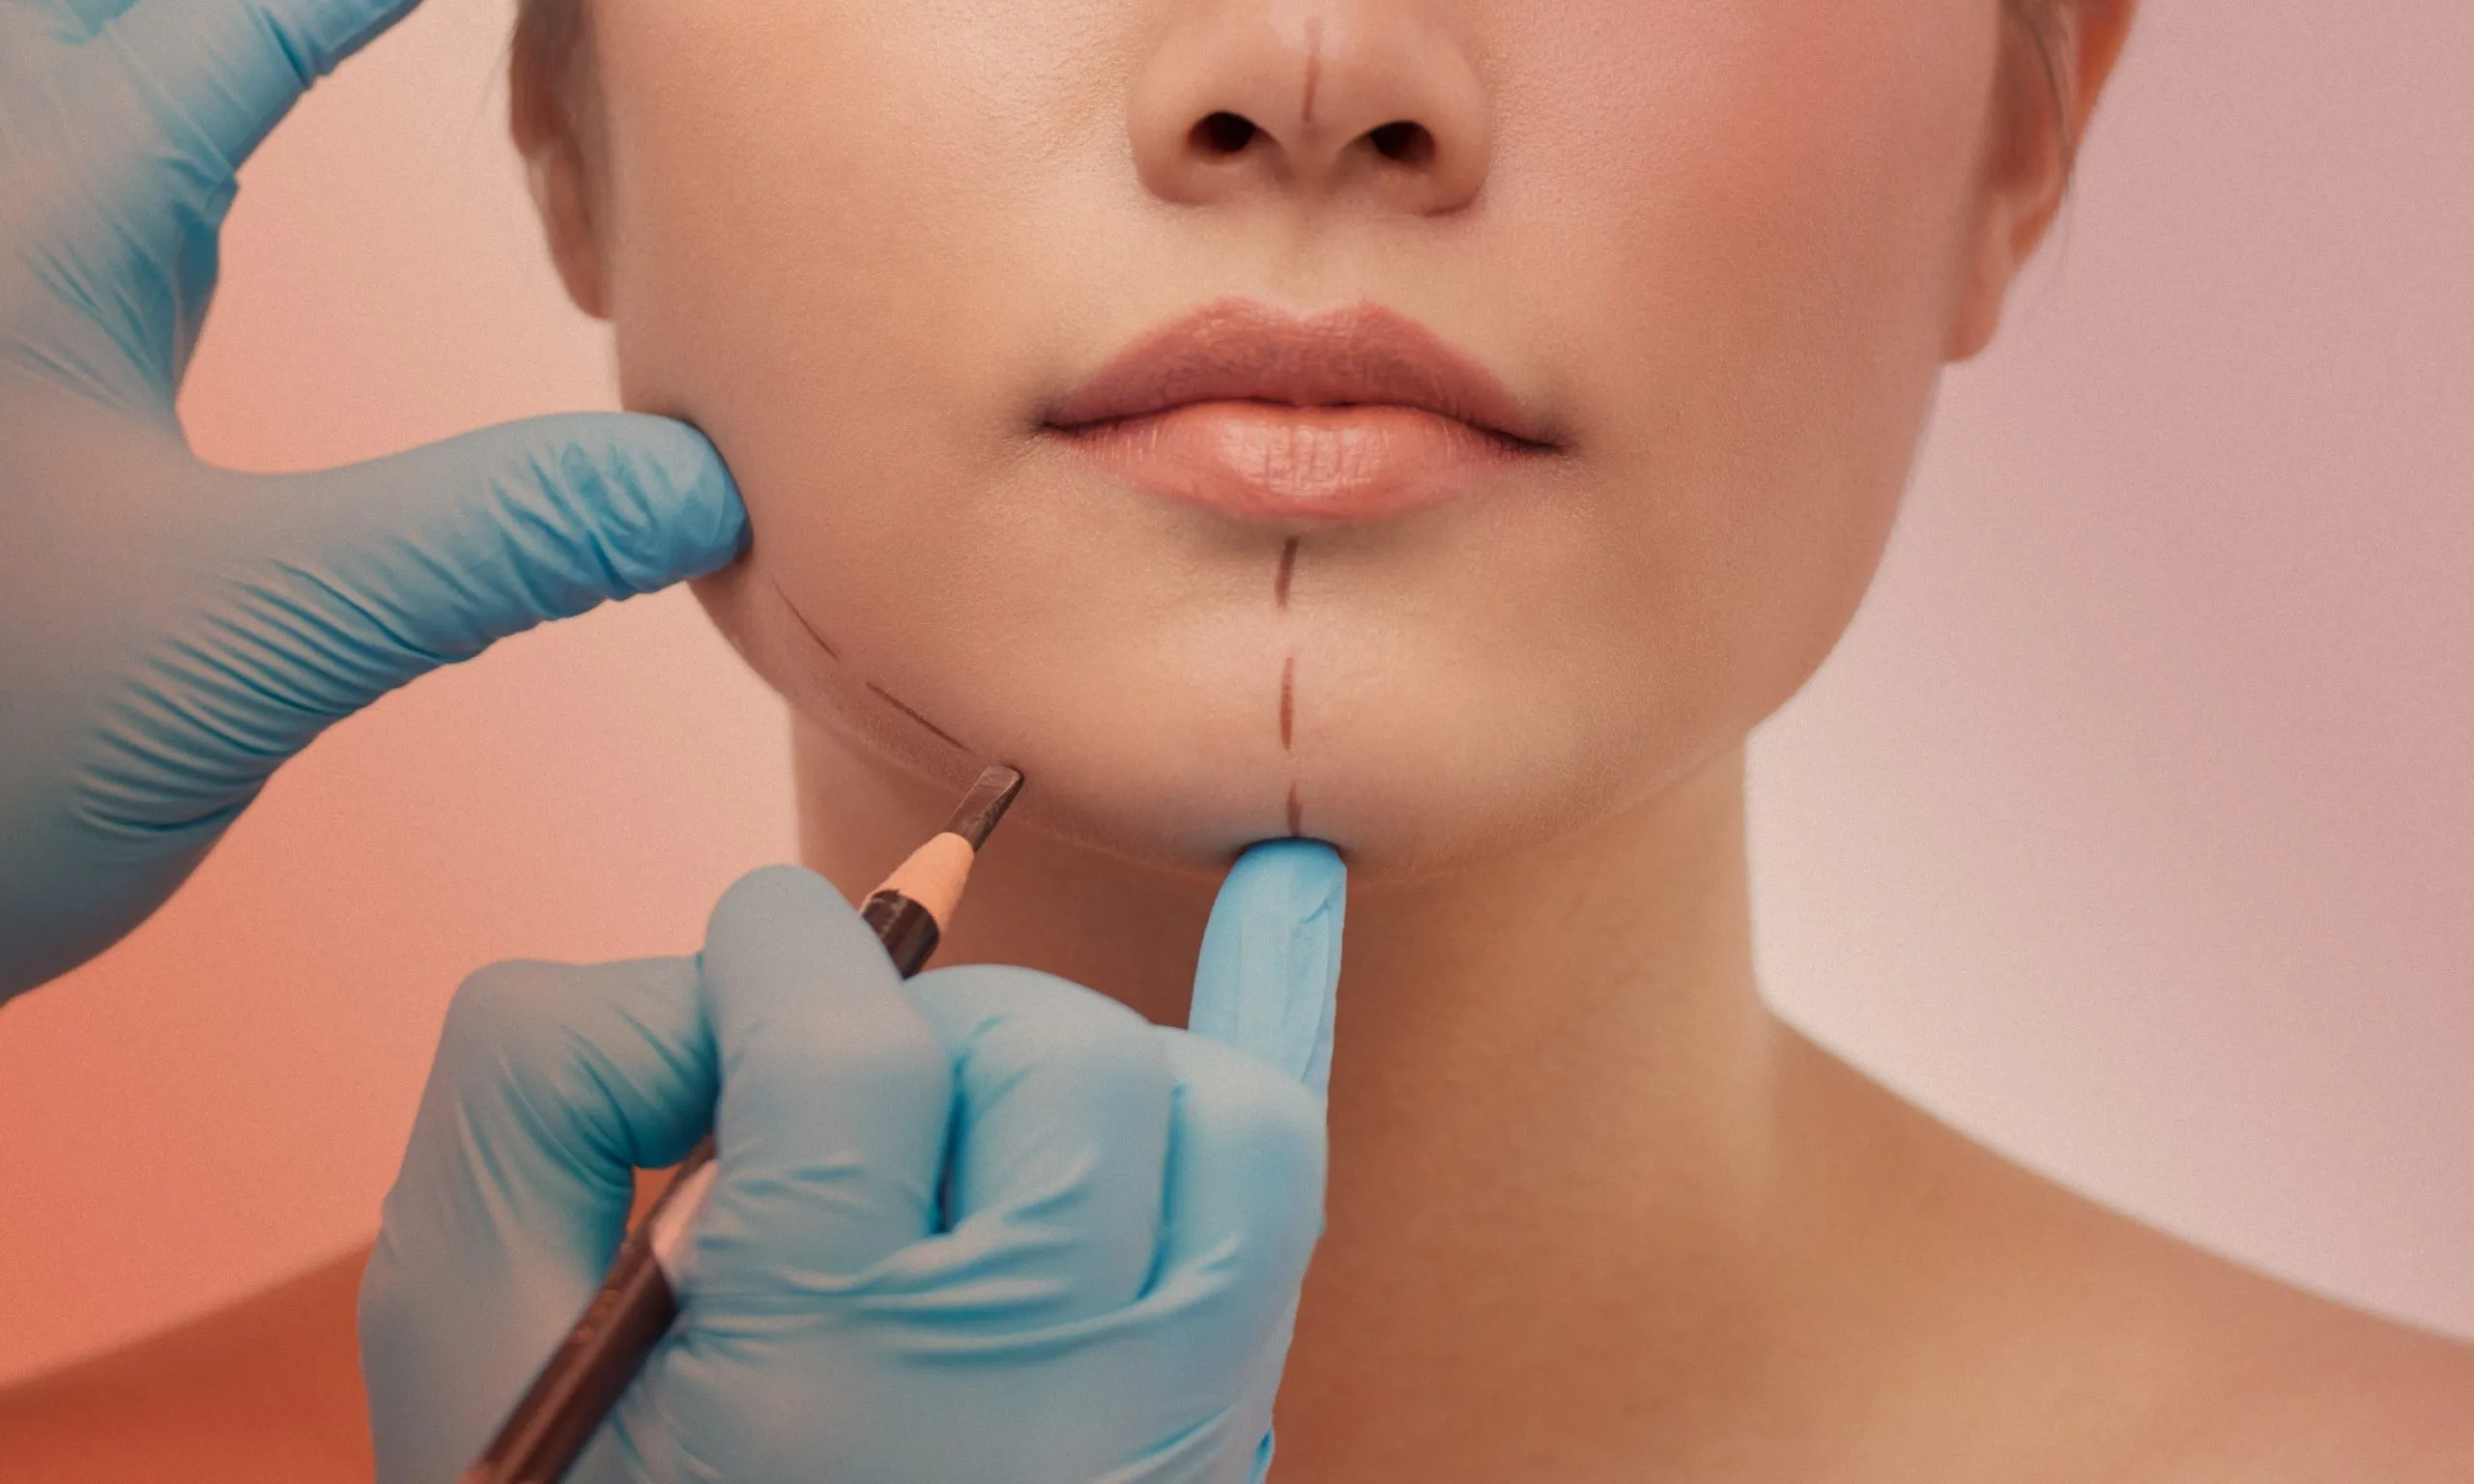 plastic surgery trends 2023 scaled